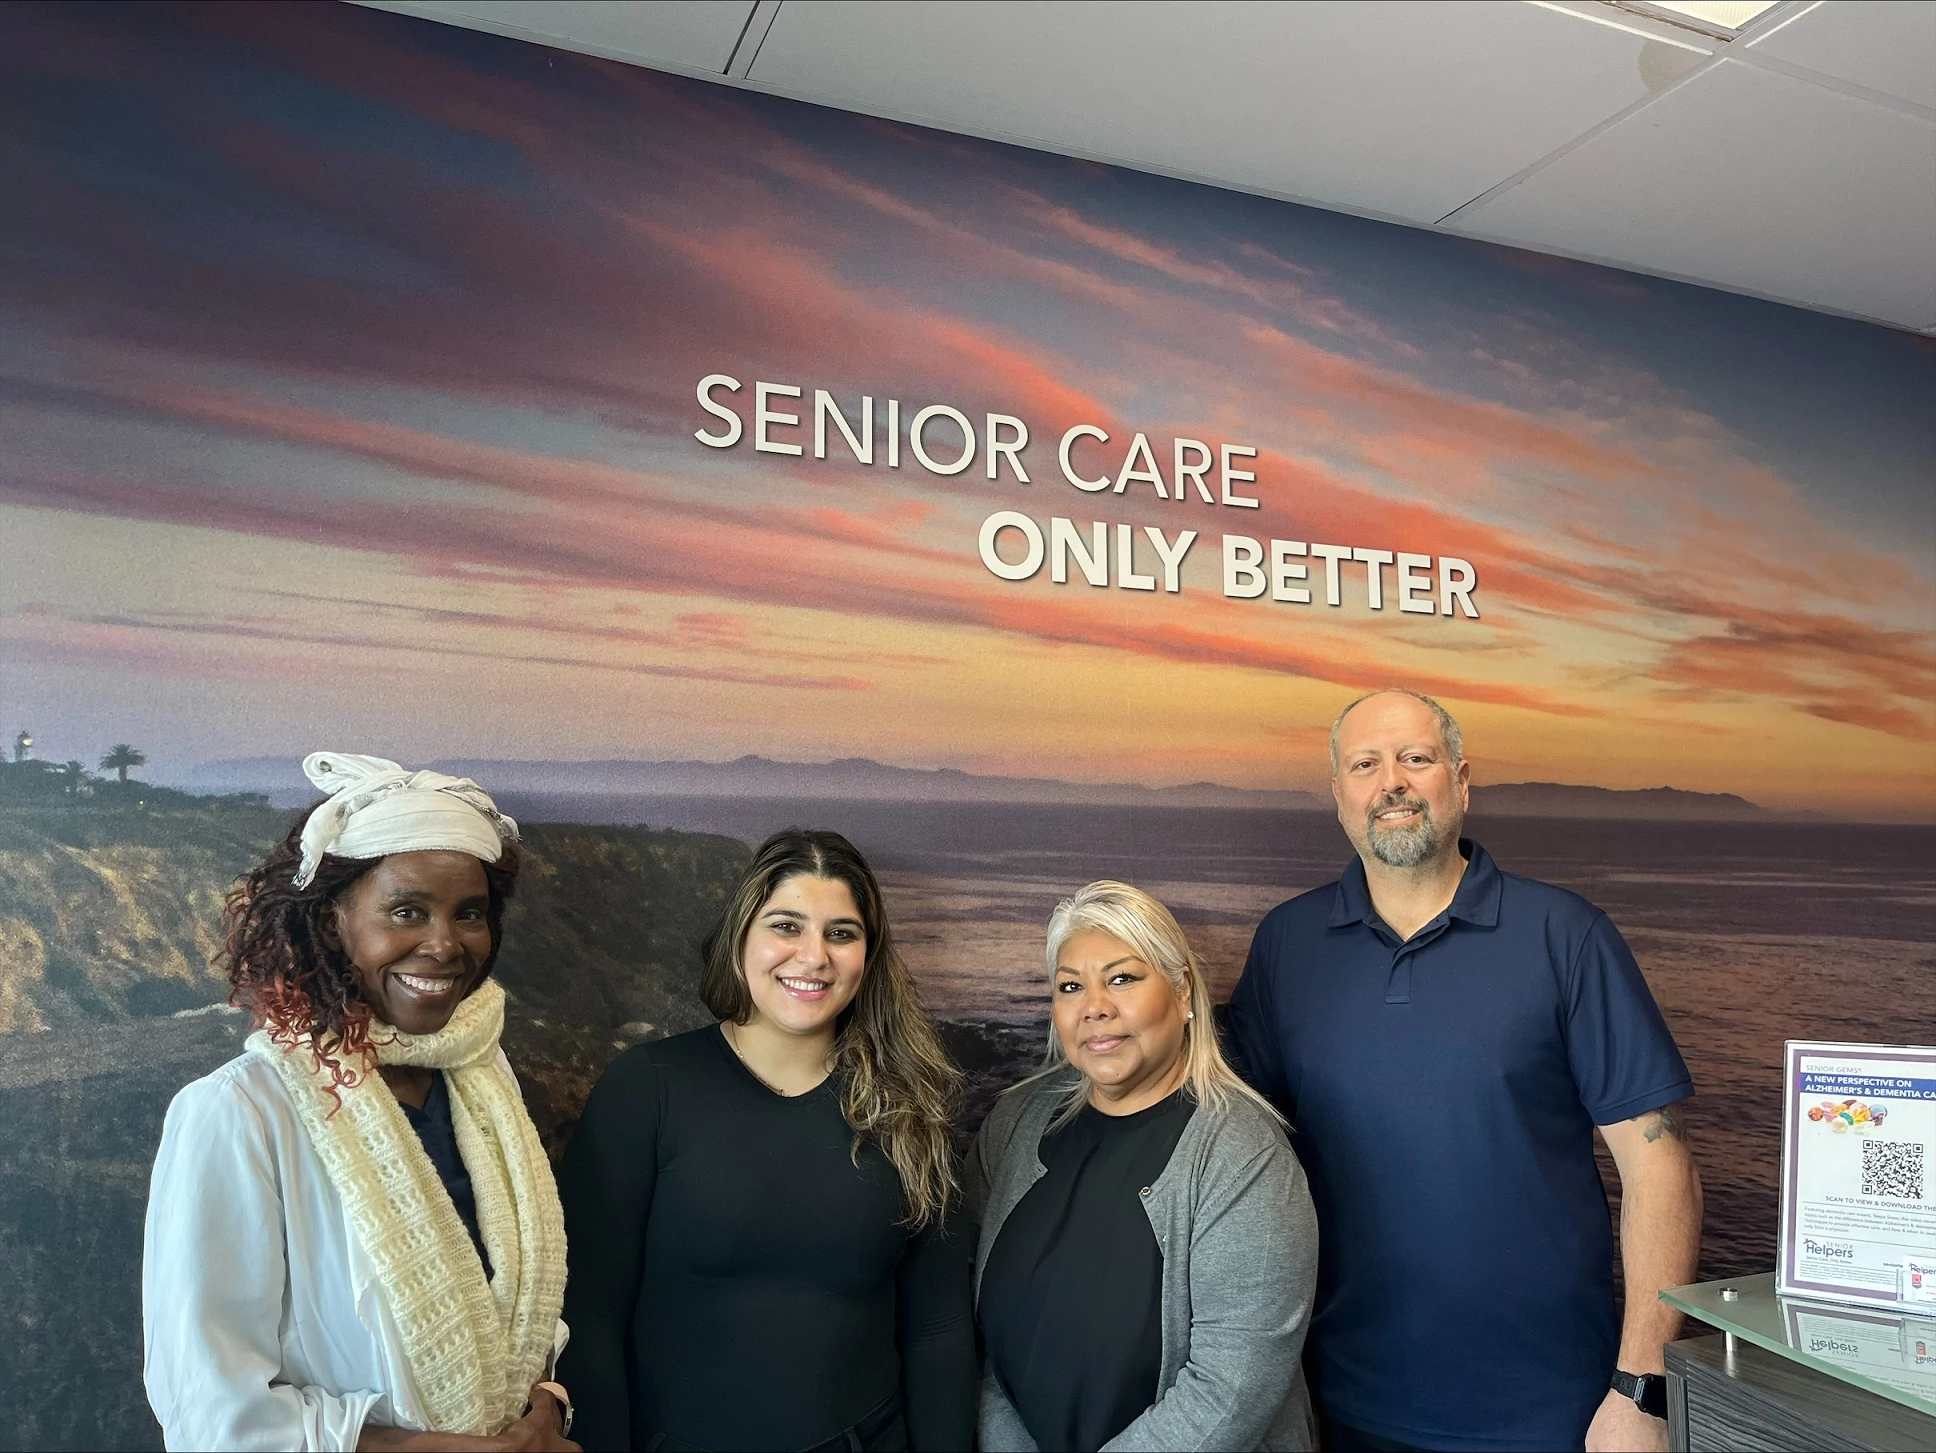 Meet our newest Care Partners servicing our Newport Beach, Corona Del Mar, and Tustin communities – Jane, Zahra, Maria, & Gurhan